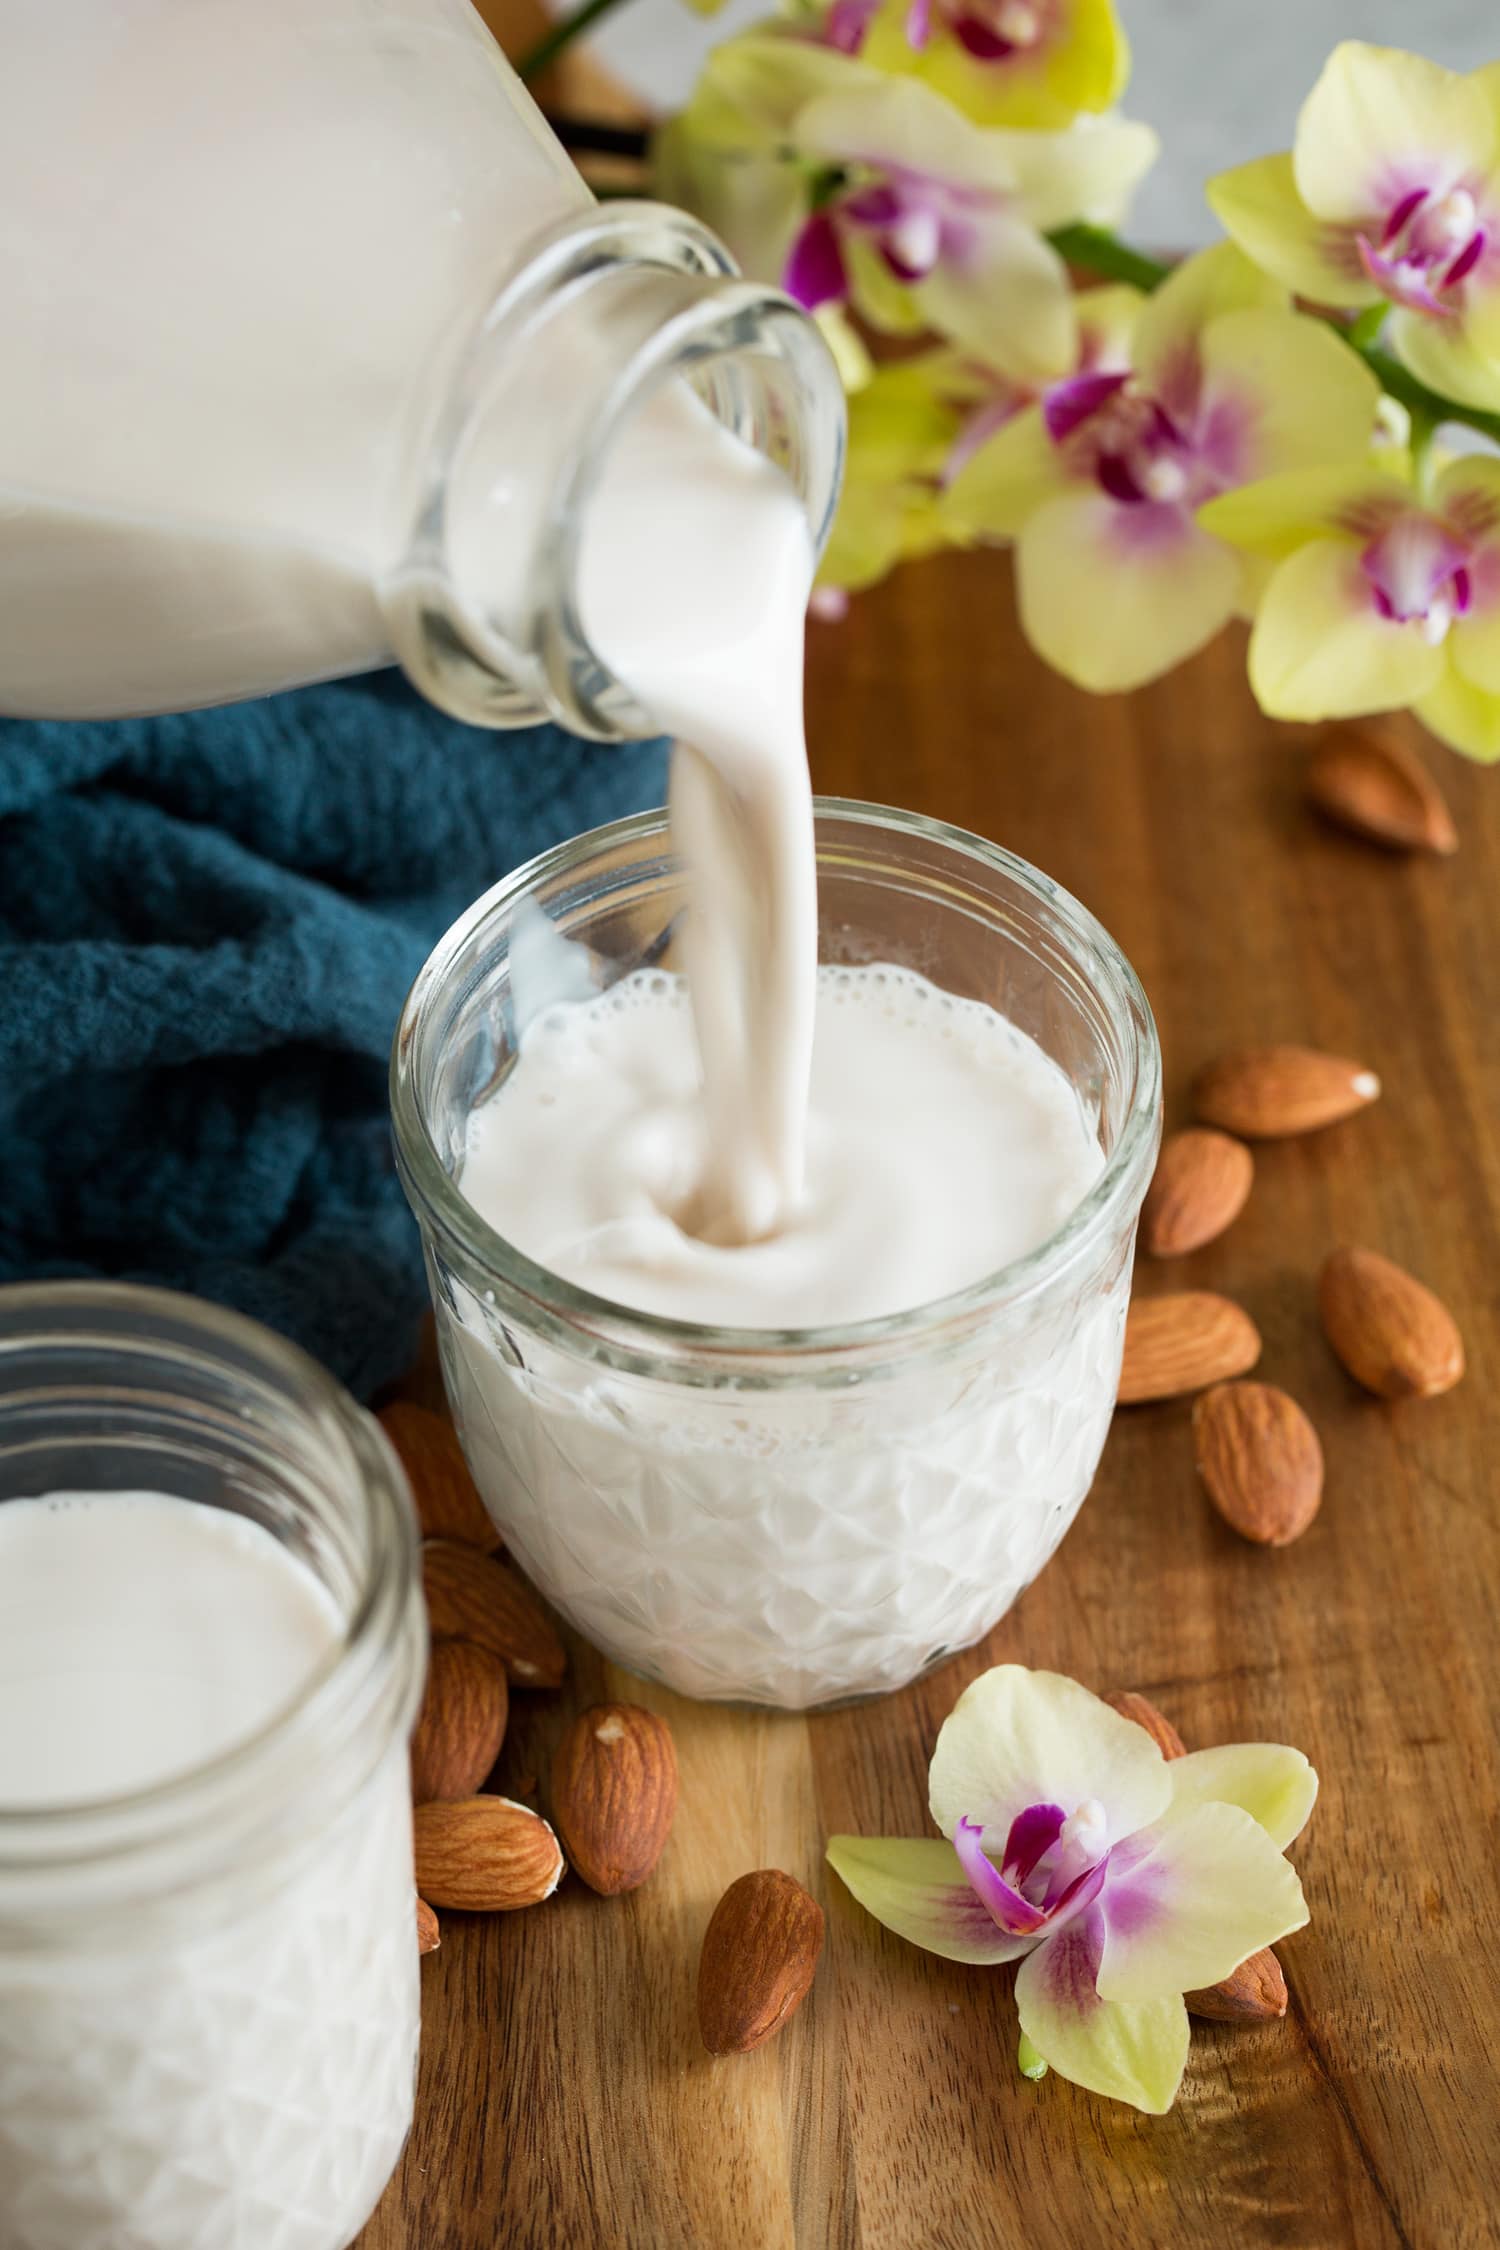 Almond milk being poured into a cup.